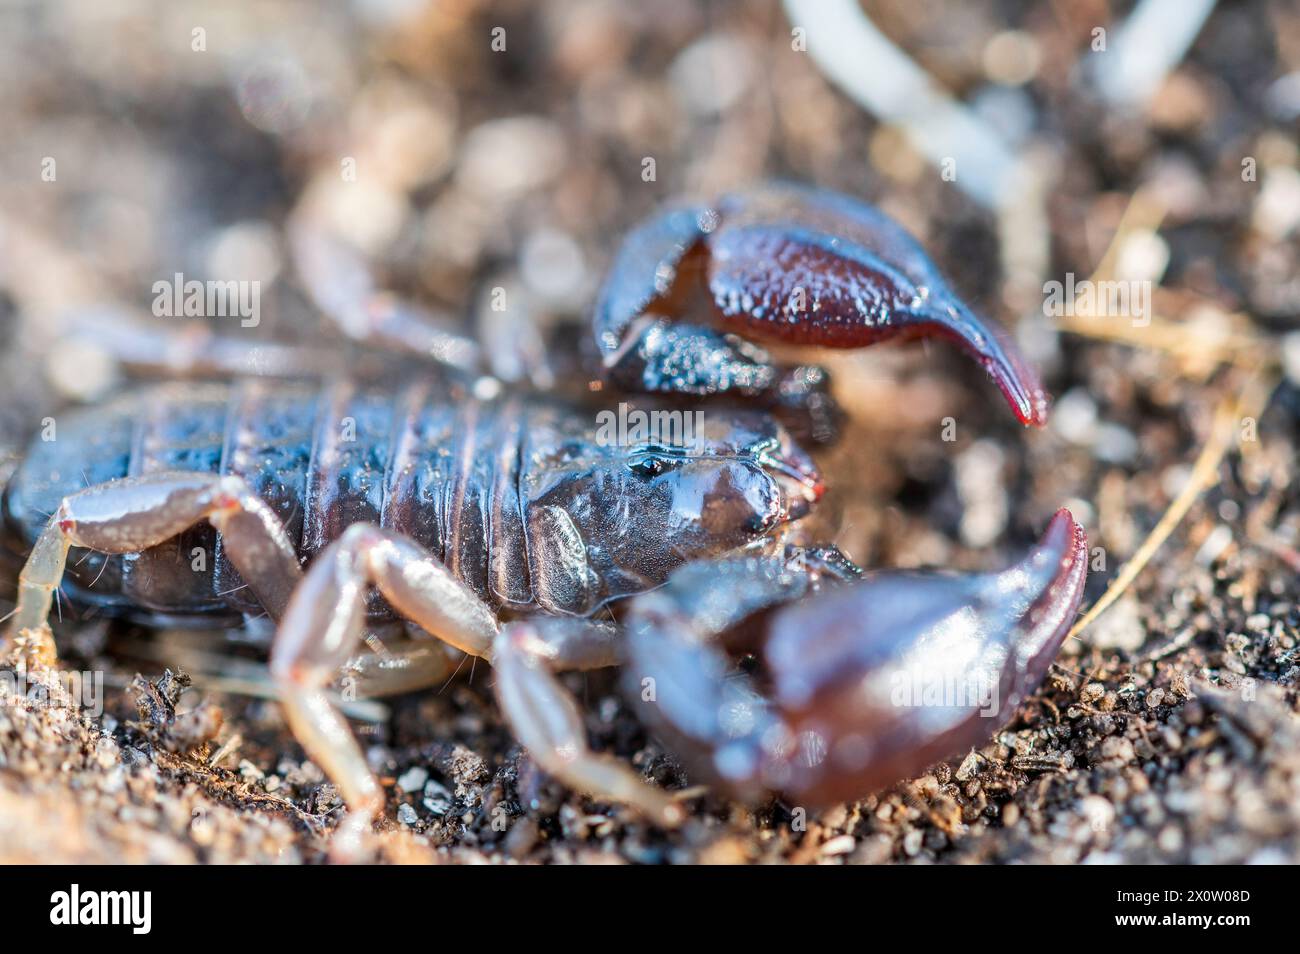 Urodacus manicatus, commonly known as the black rock scorpion, is a species of scorpion belonging to the family Urodacidae. Stock Photo